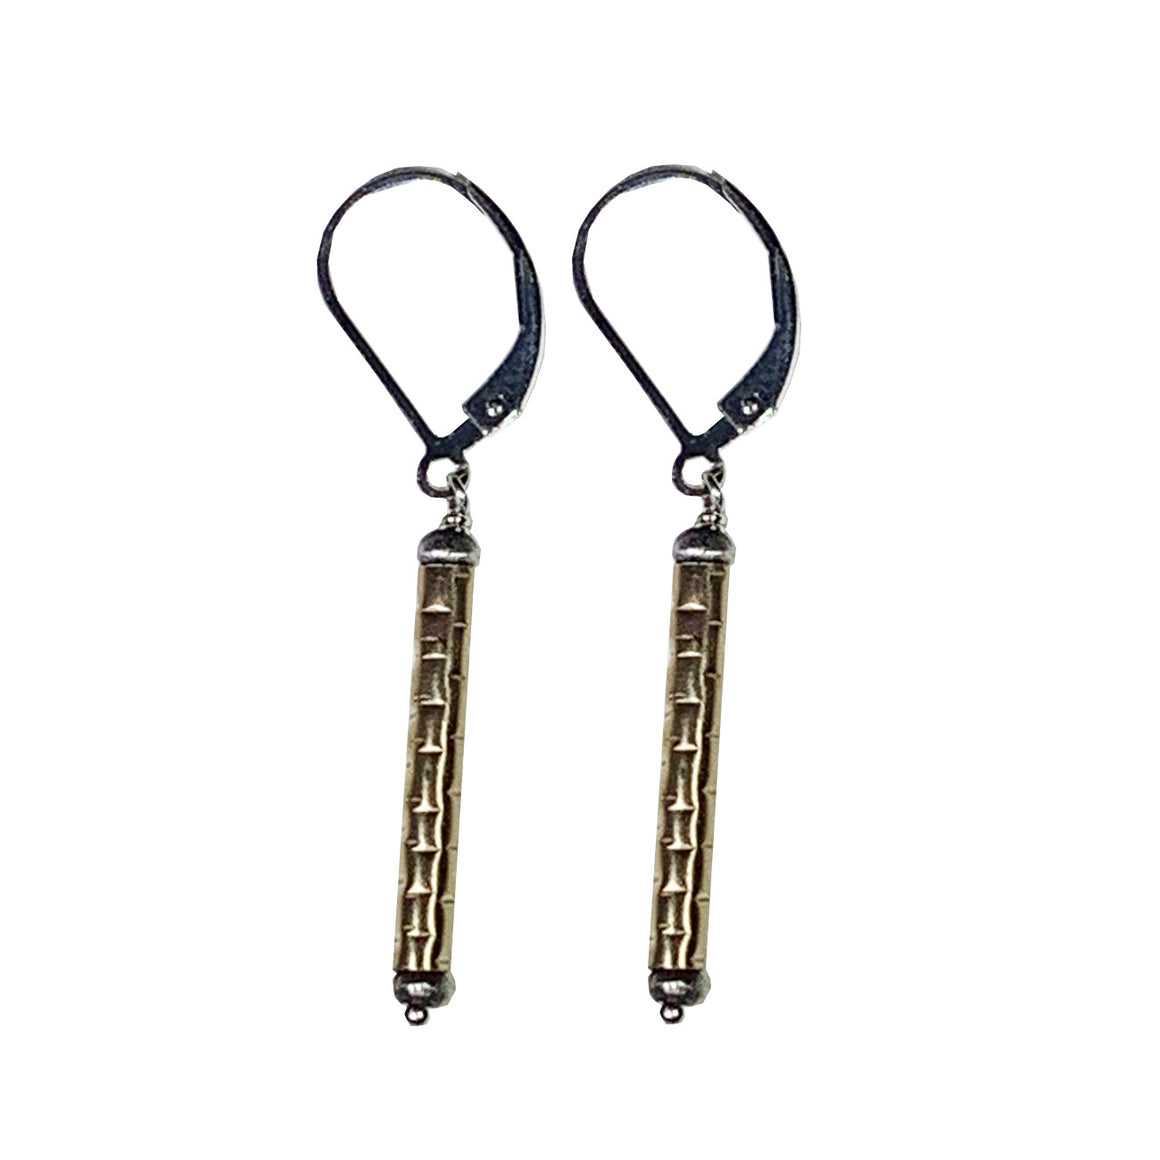 Etched 14 kt Goldfill Drop Earrings